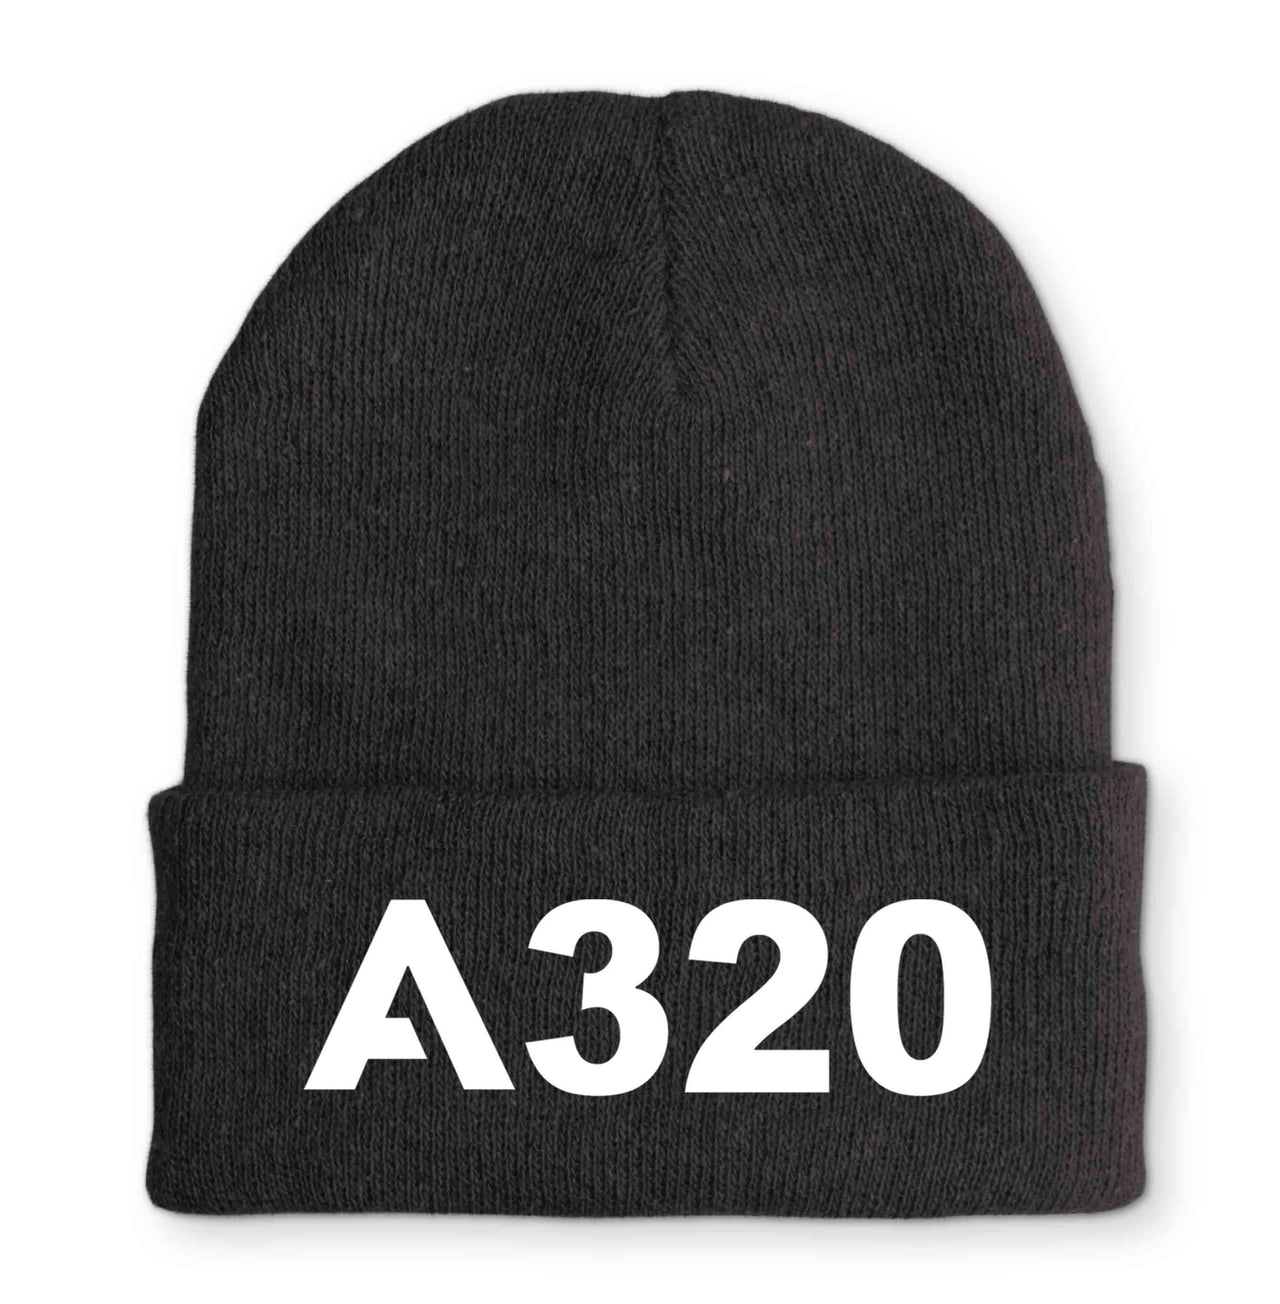 A320 Flat Text Embroidered Beanies